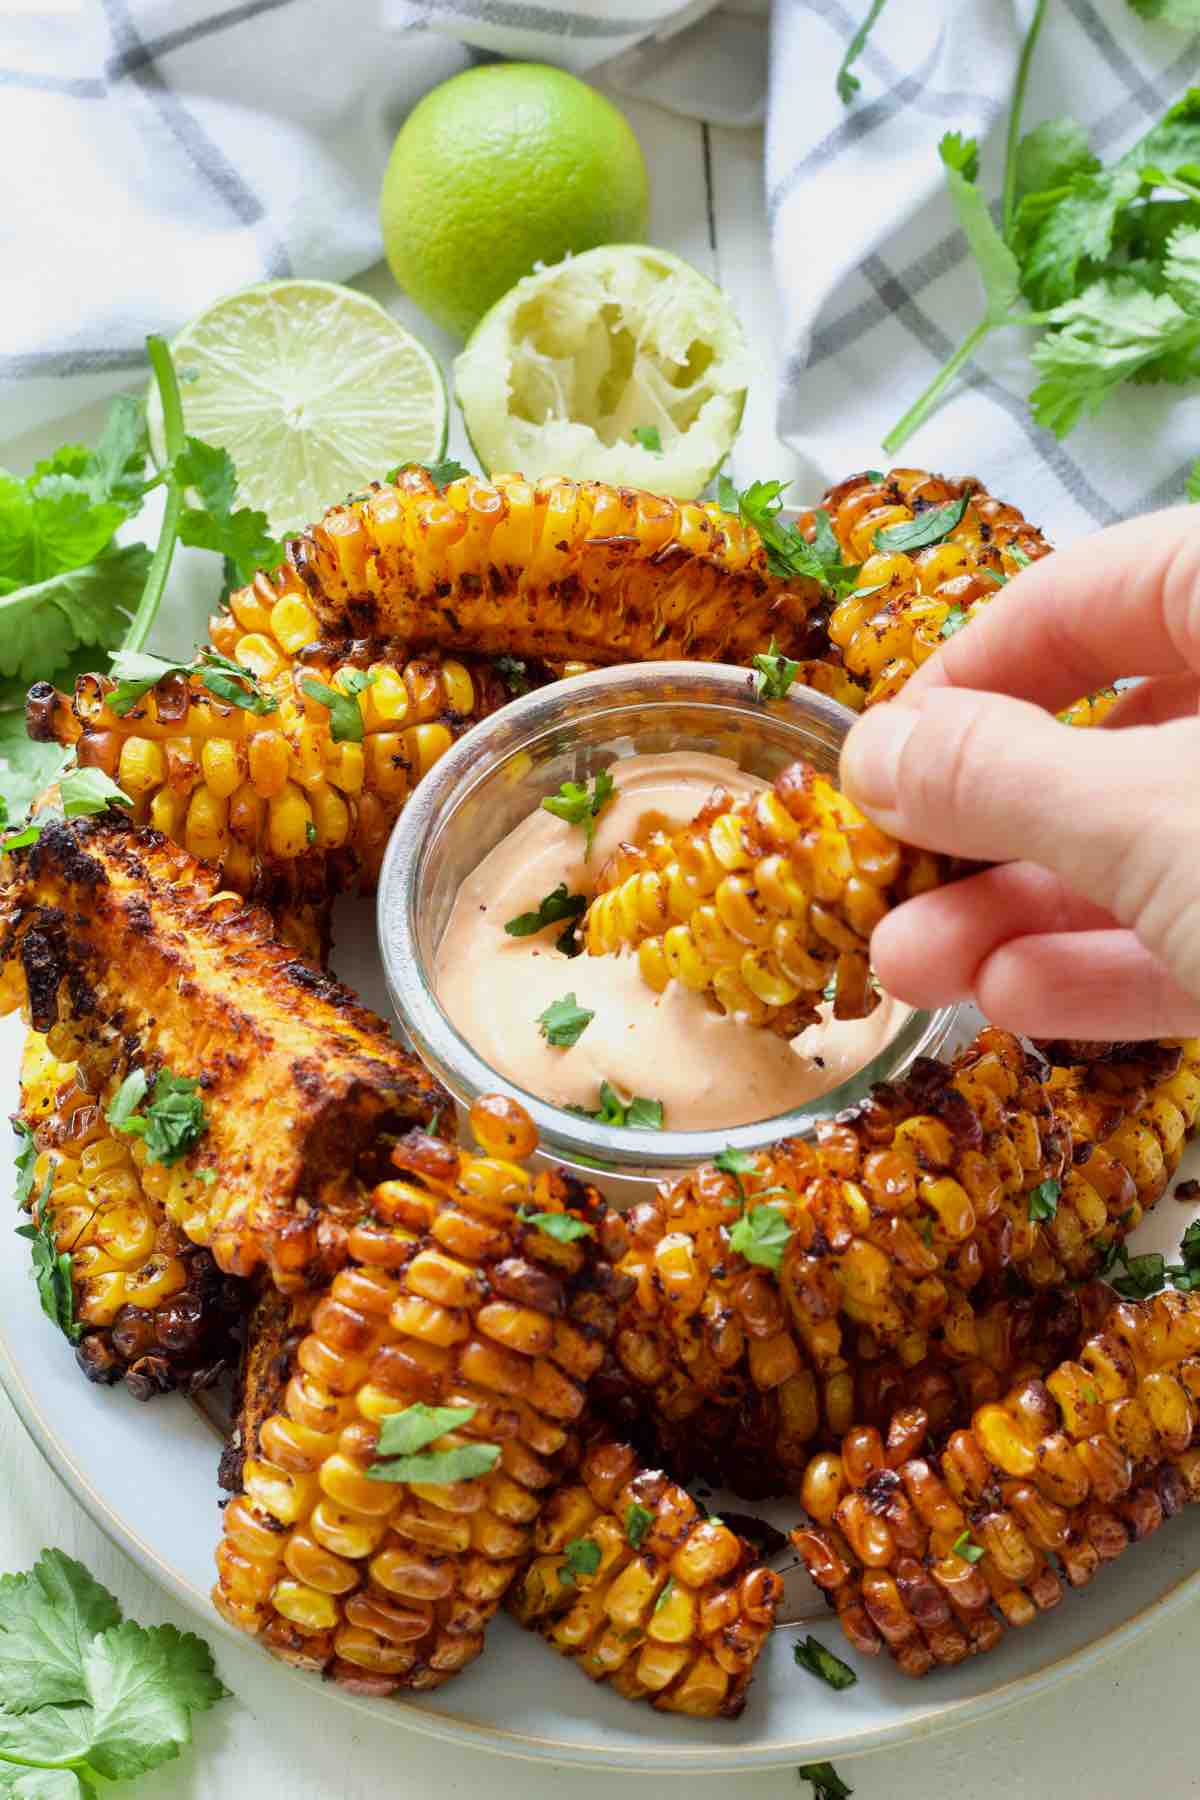 Hand dunking corn rib in a bowl with a dip.